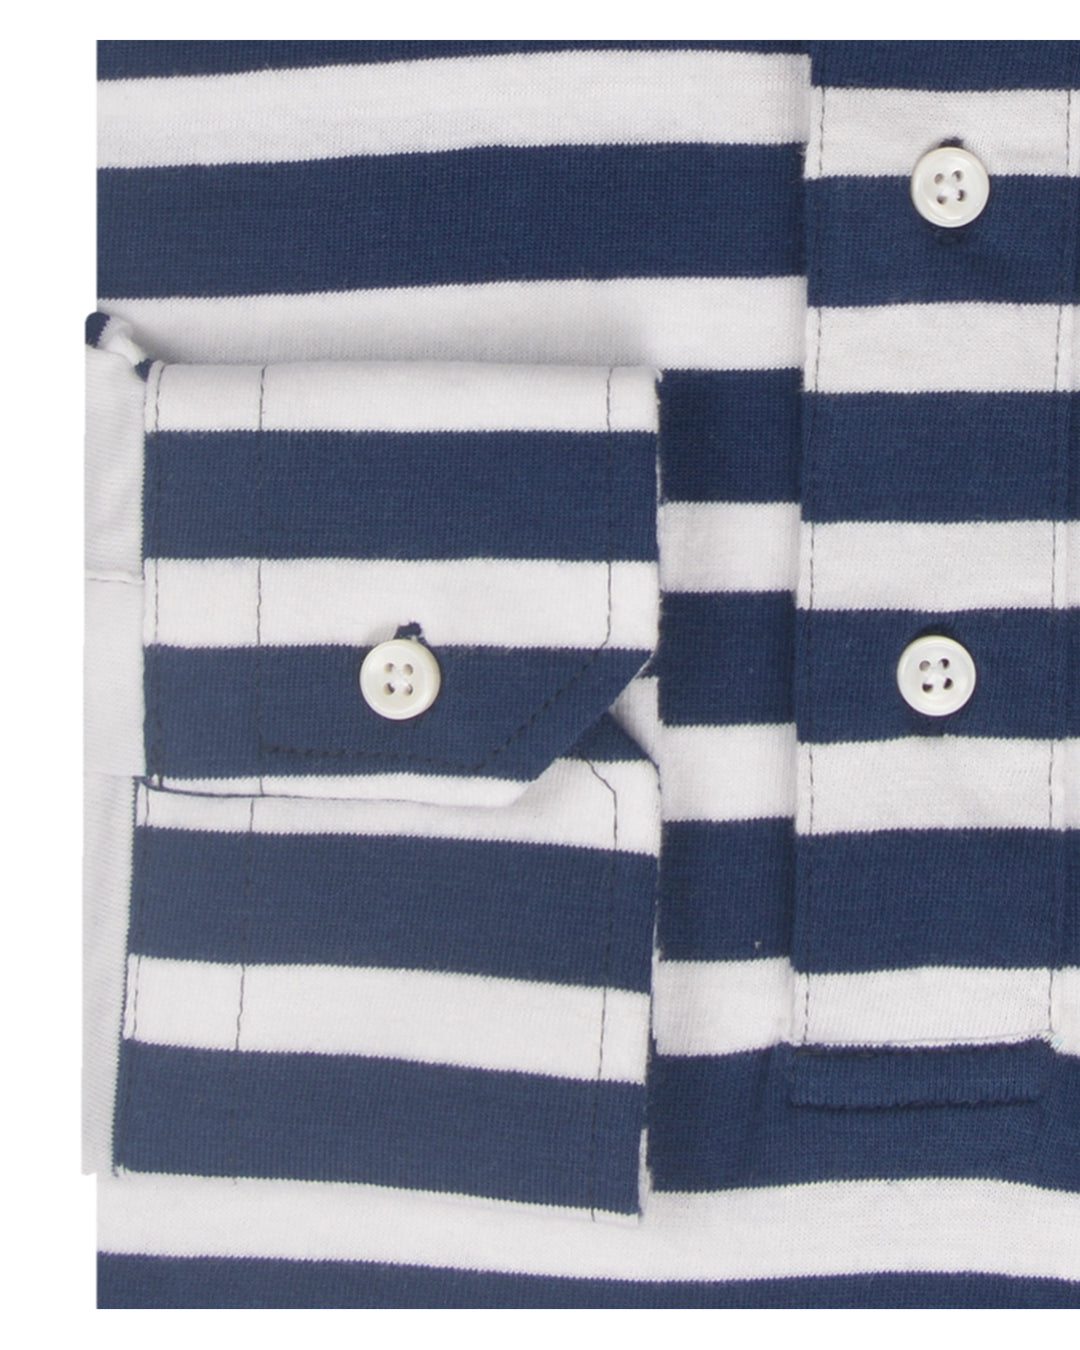 Cuff of the custom oxford polo shirt for men by Luxire in colbalt blue and white stripes